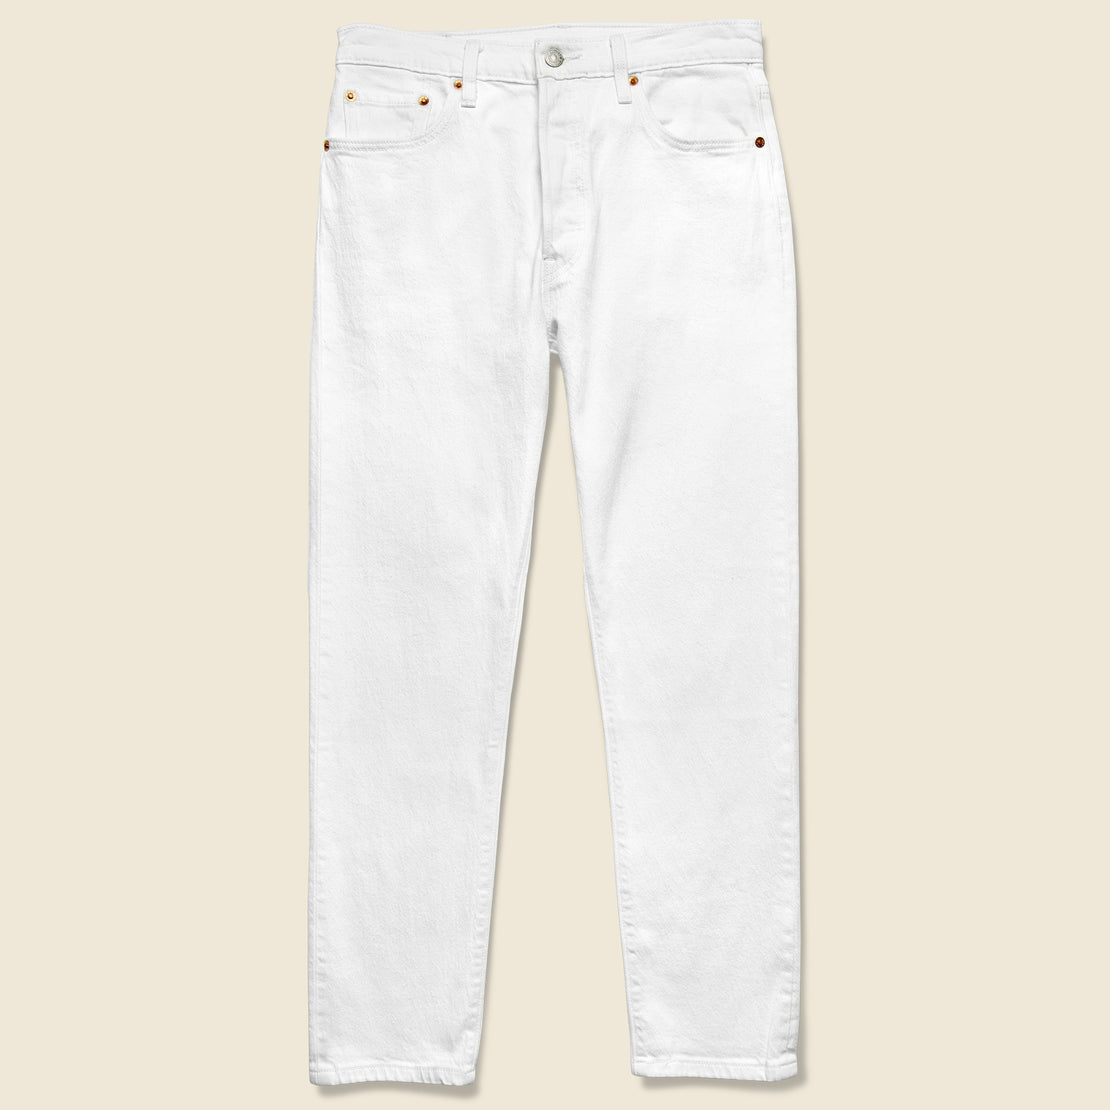 Levis Premium 501 Skinny - In the Clouds